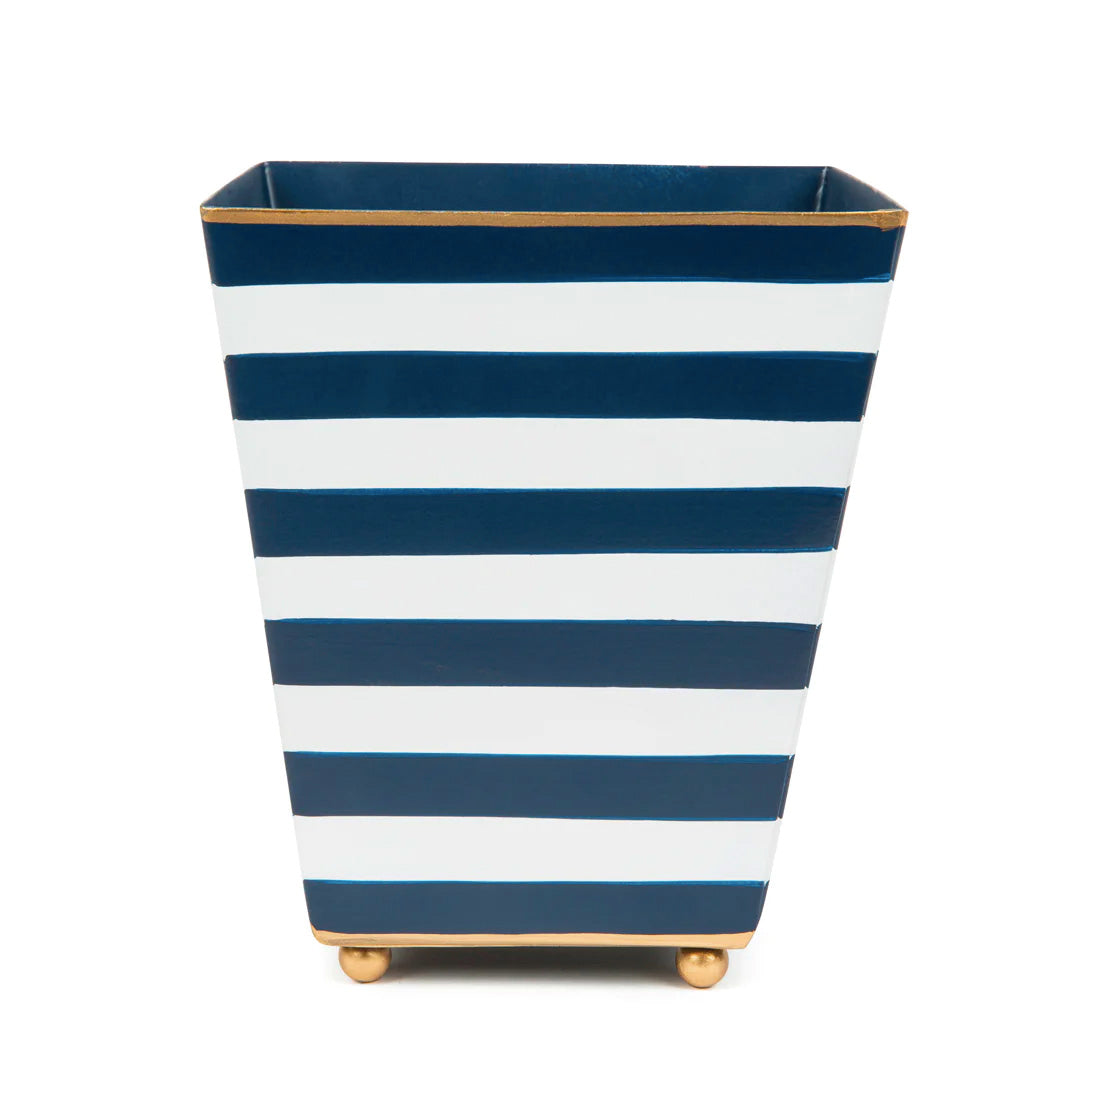 6" Navy and White Striped Cache Pot